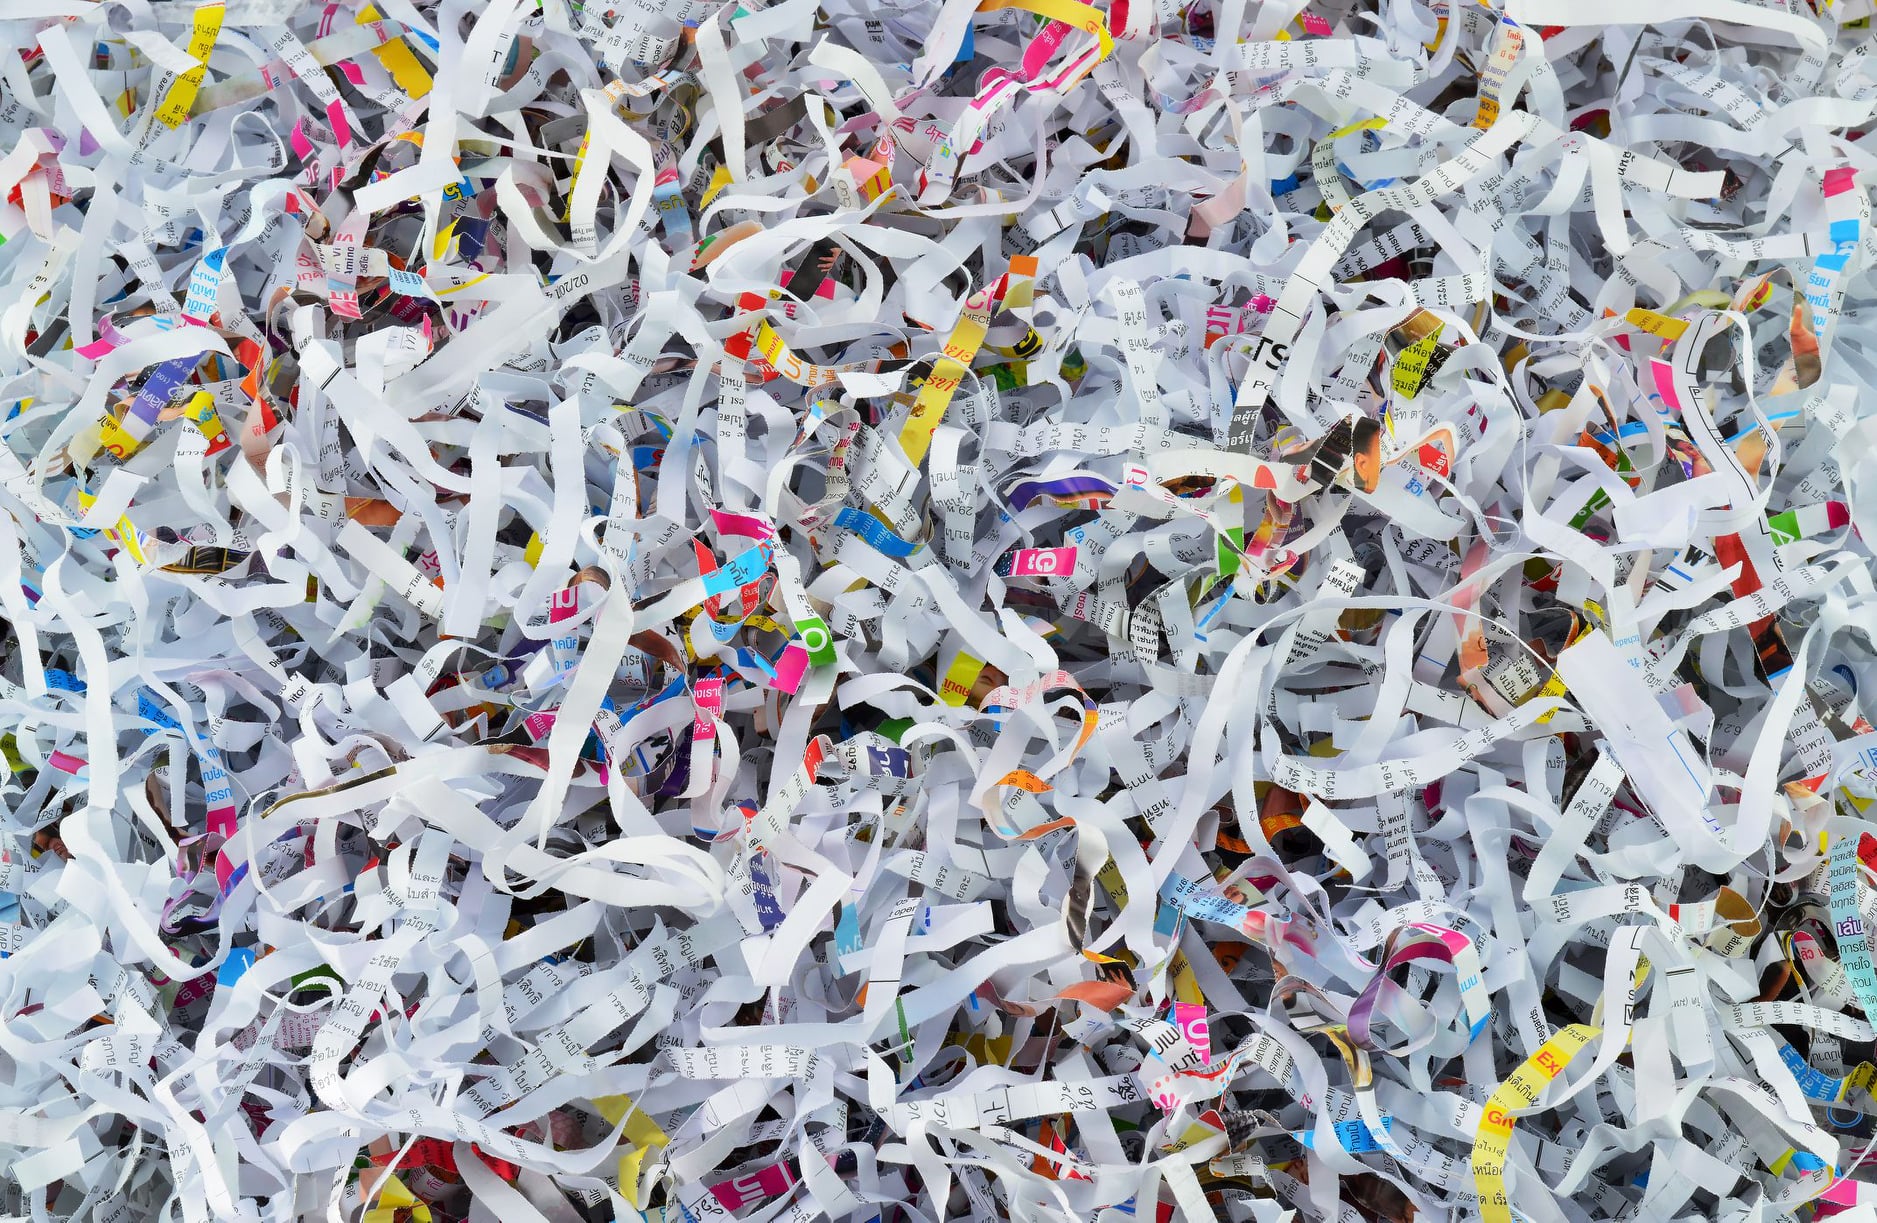 Shredding Day Held at North Point Library